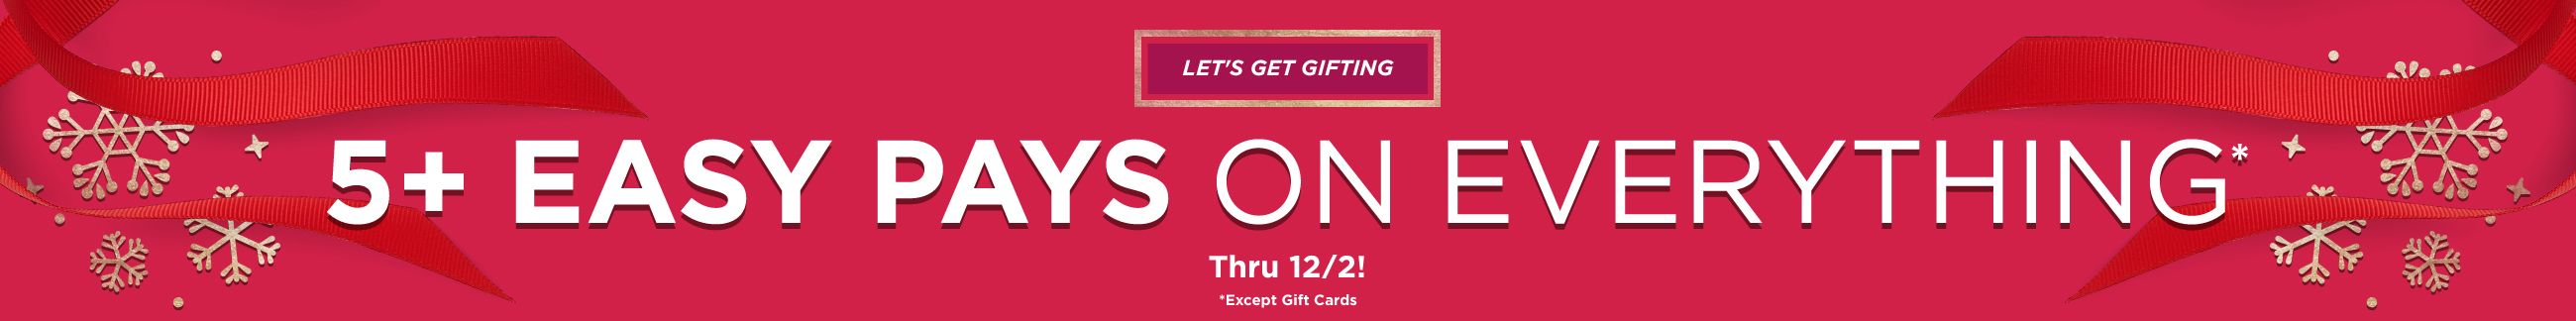 Let's get Gifting 5+ Easy pays on everything  Thru 12/2! *Except Gift Cards